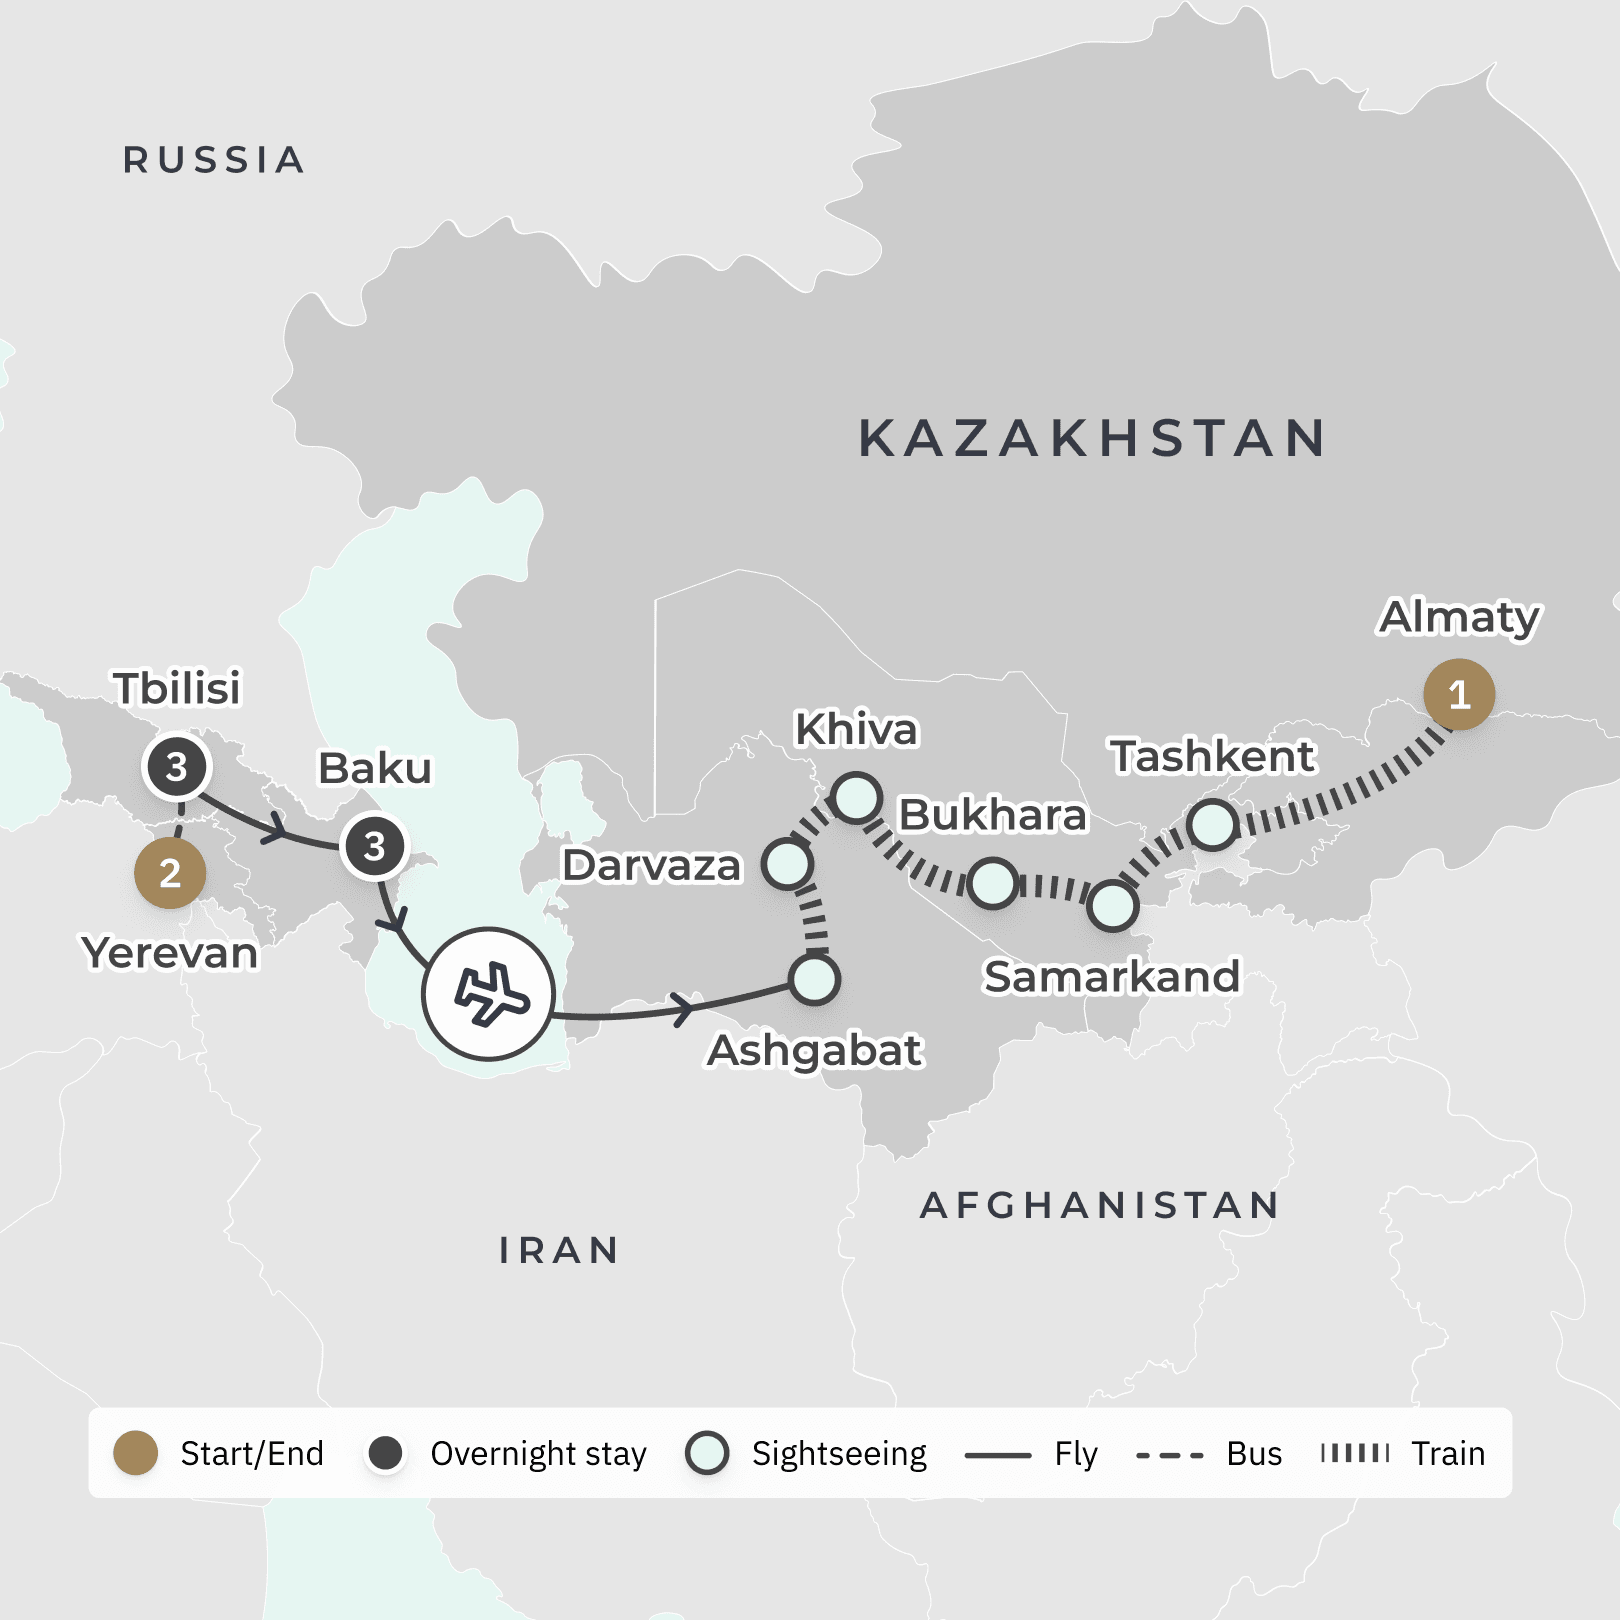 Western & Central Asia: Caspian Odyssey 2025 with All-Inclusive Ultra Lux Golden Eagle Rail Journey, Charter Flights & Samarkand route map